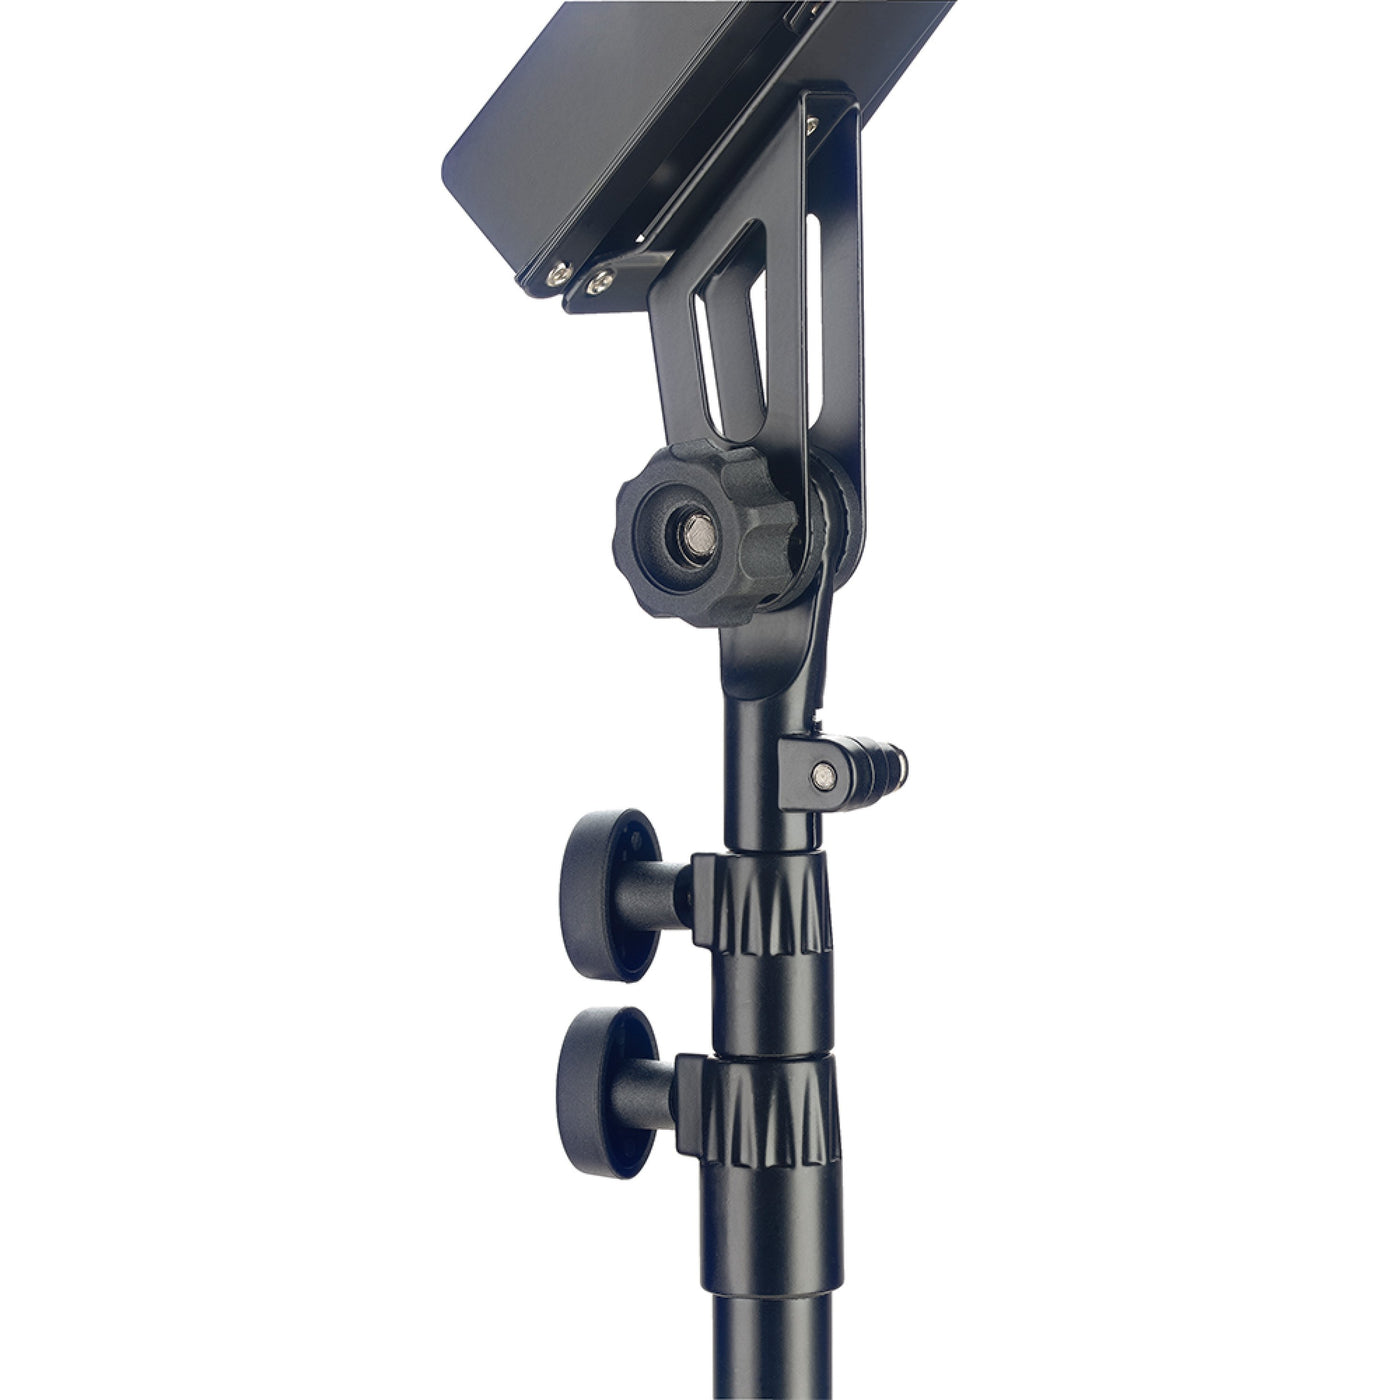 MUS-A4 BK 3 Sections Music Stand-Black